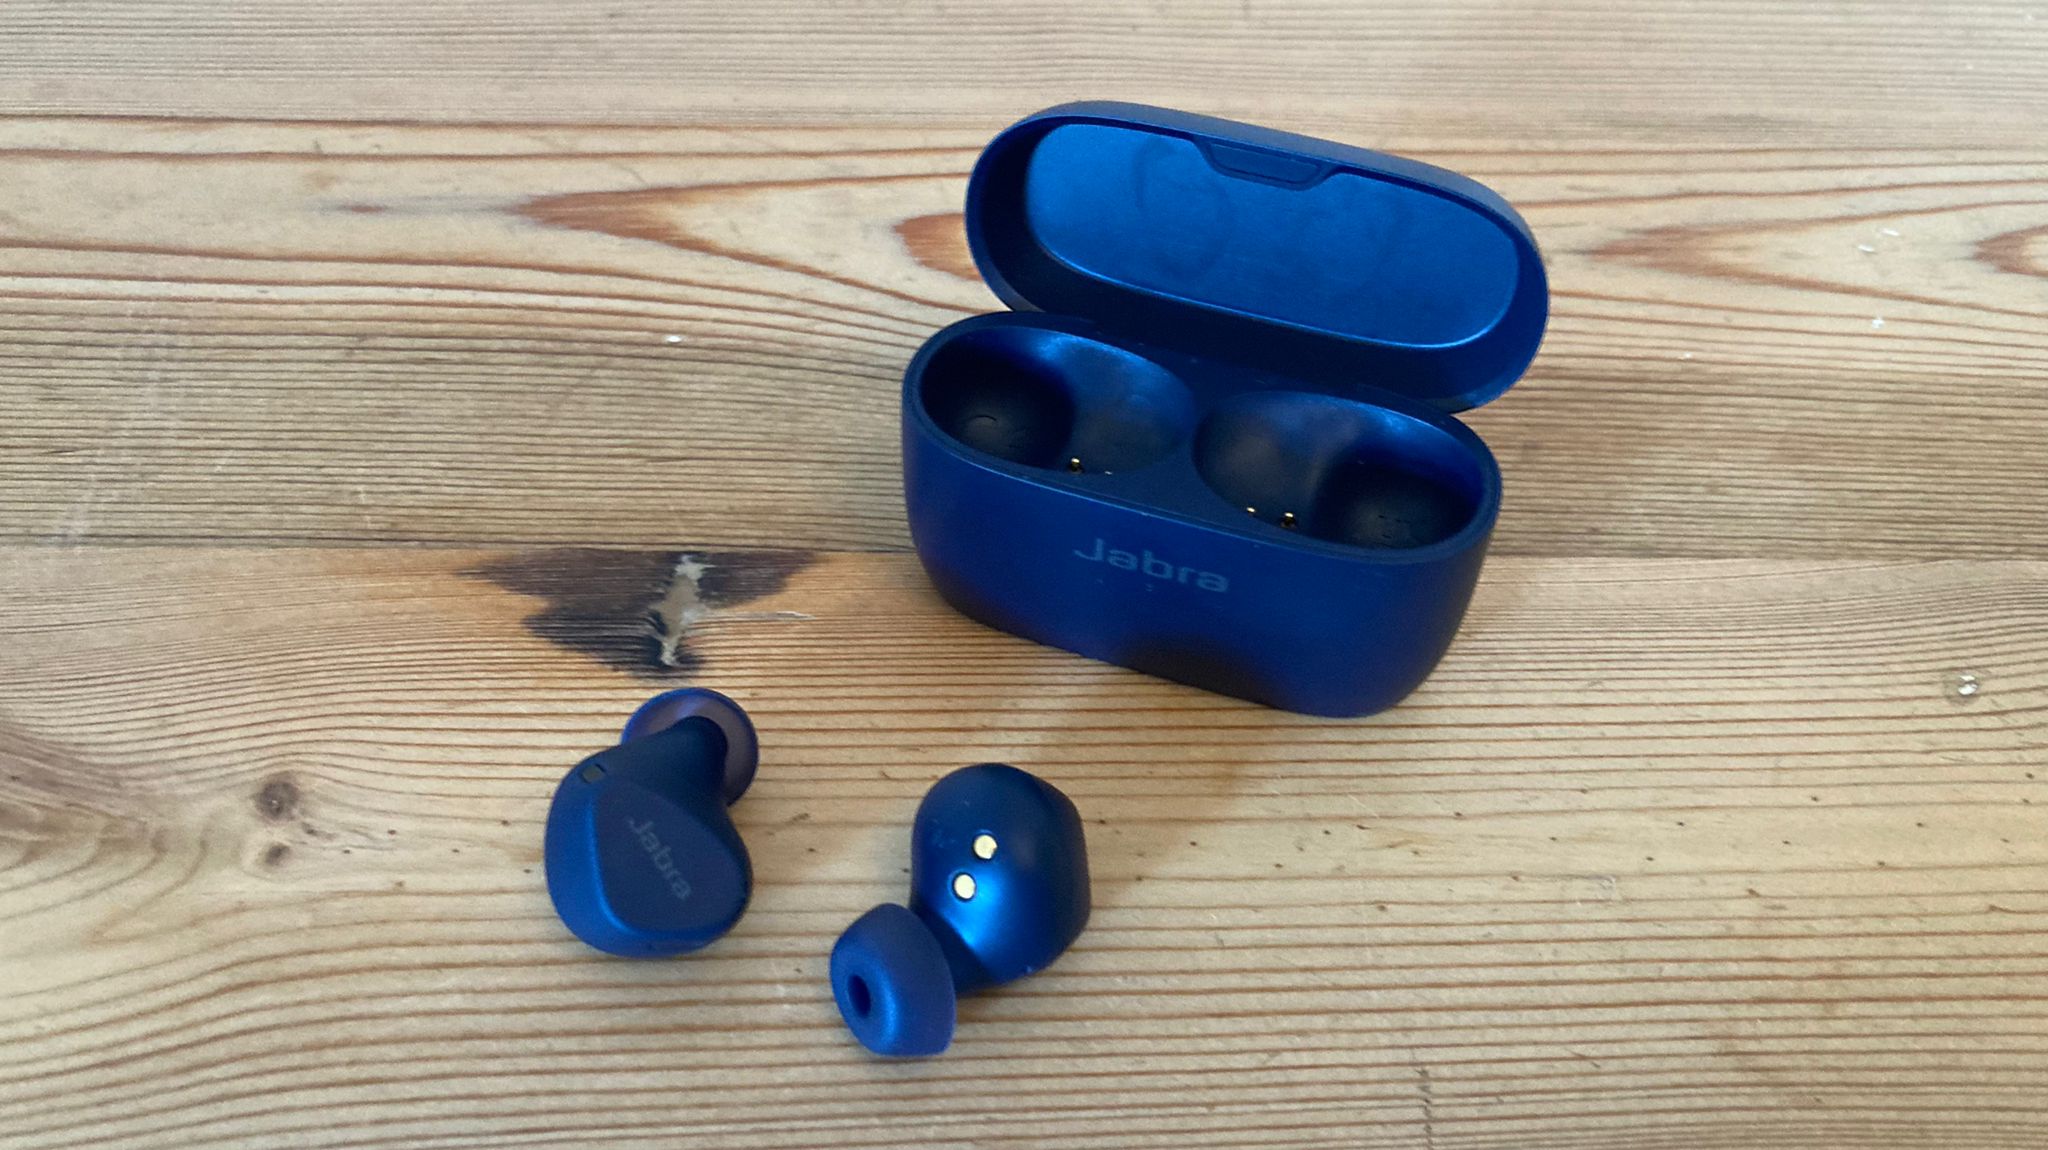 The Jabra Elite 4 Active headphones being tested by Live Science